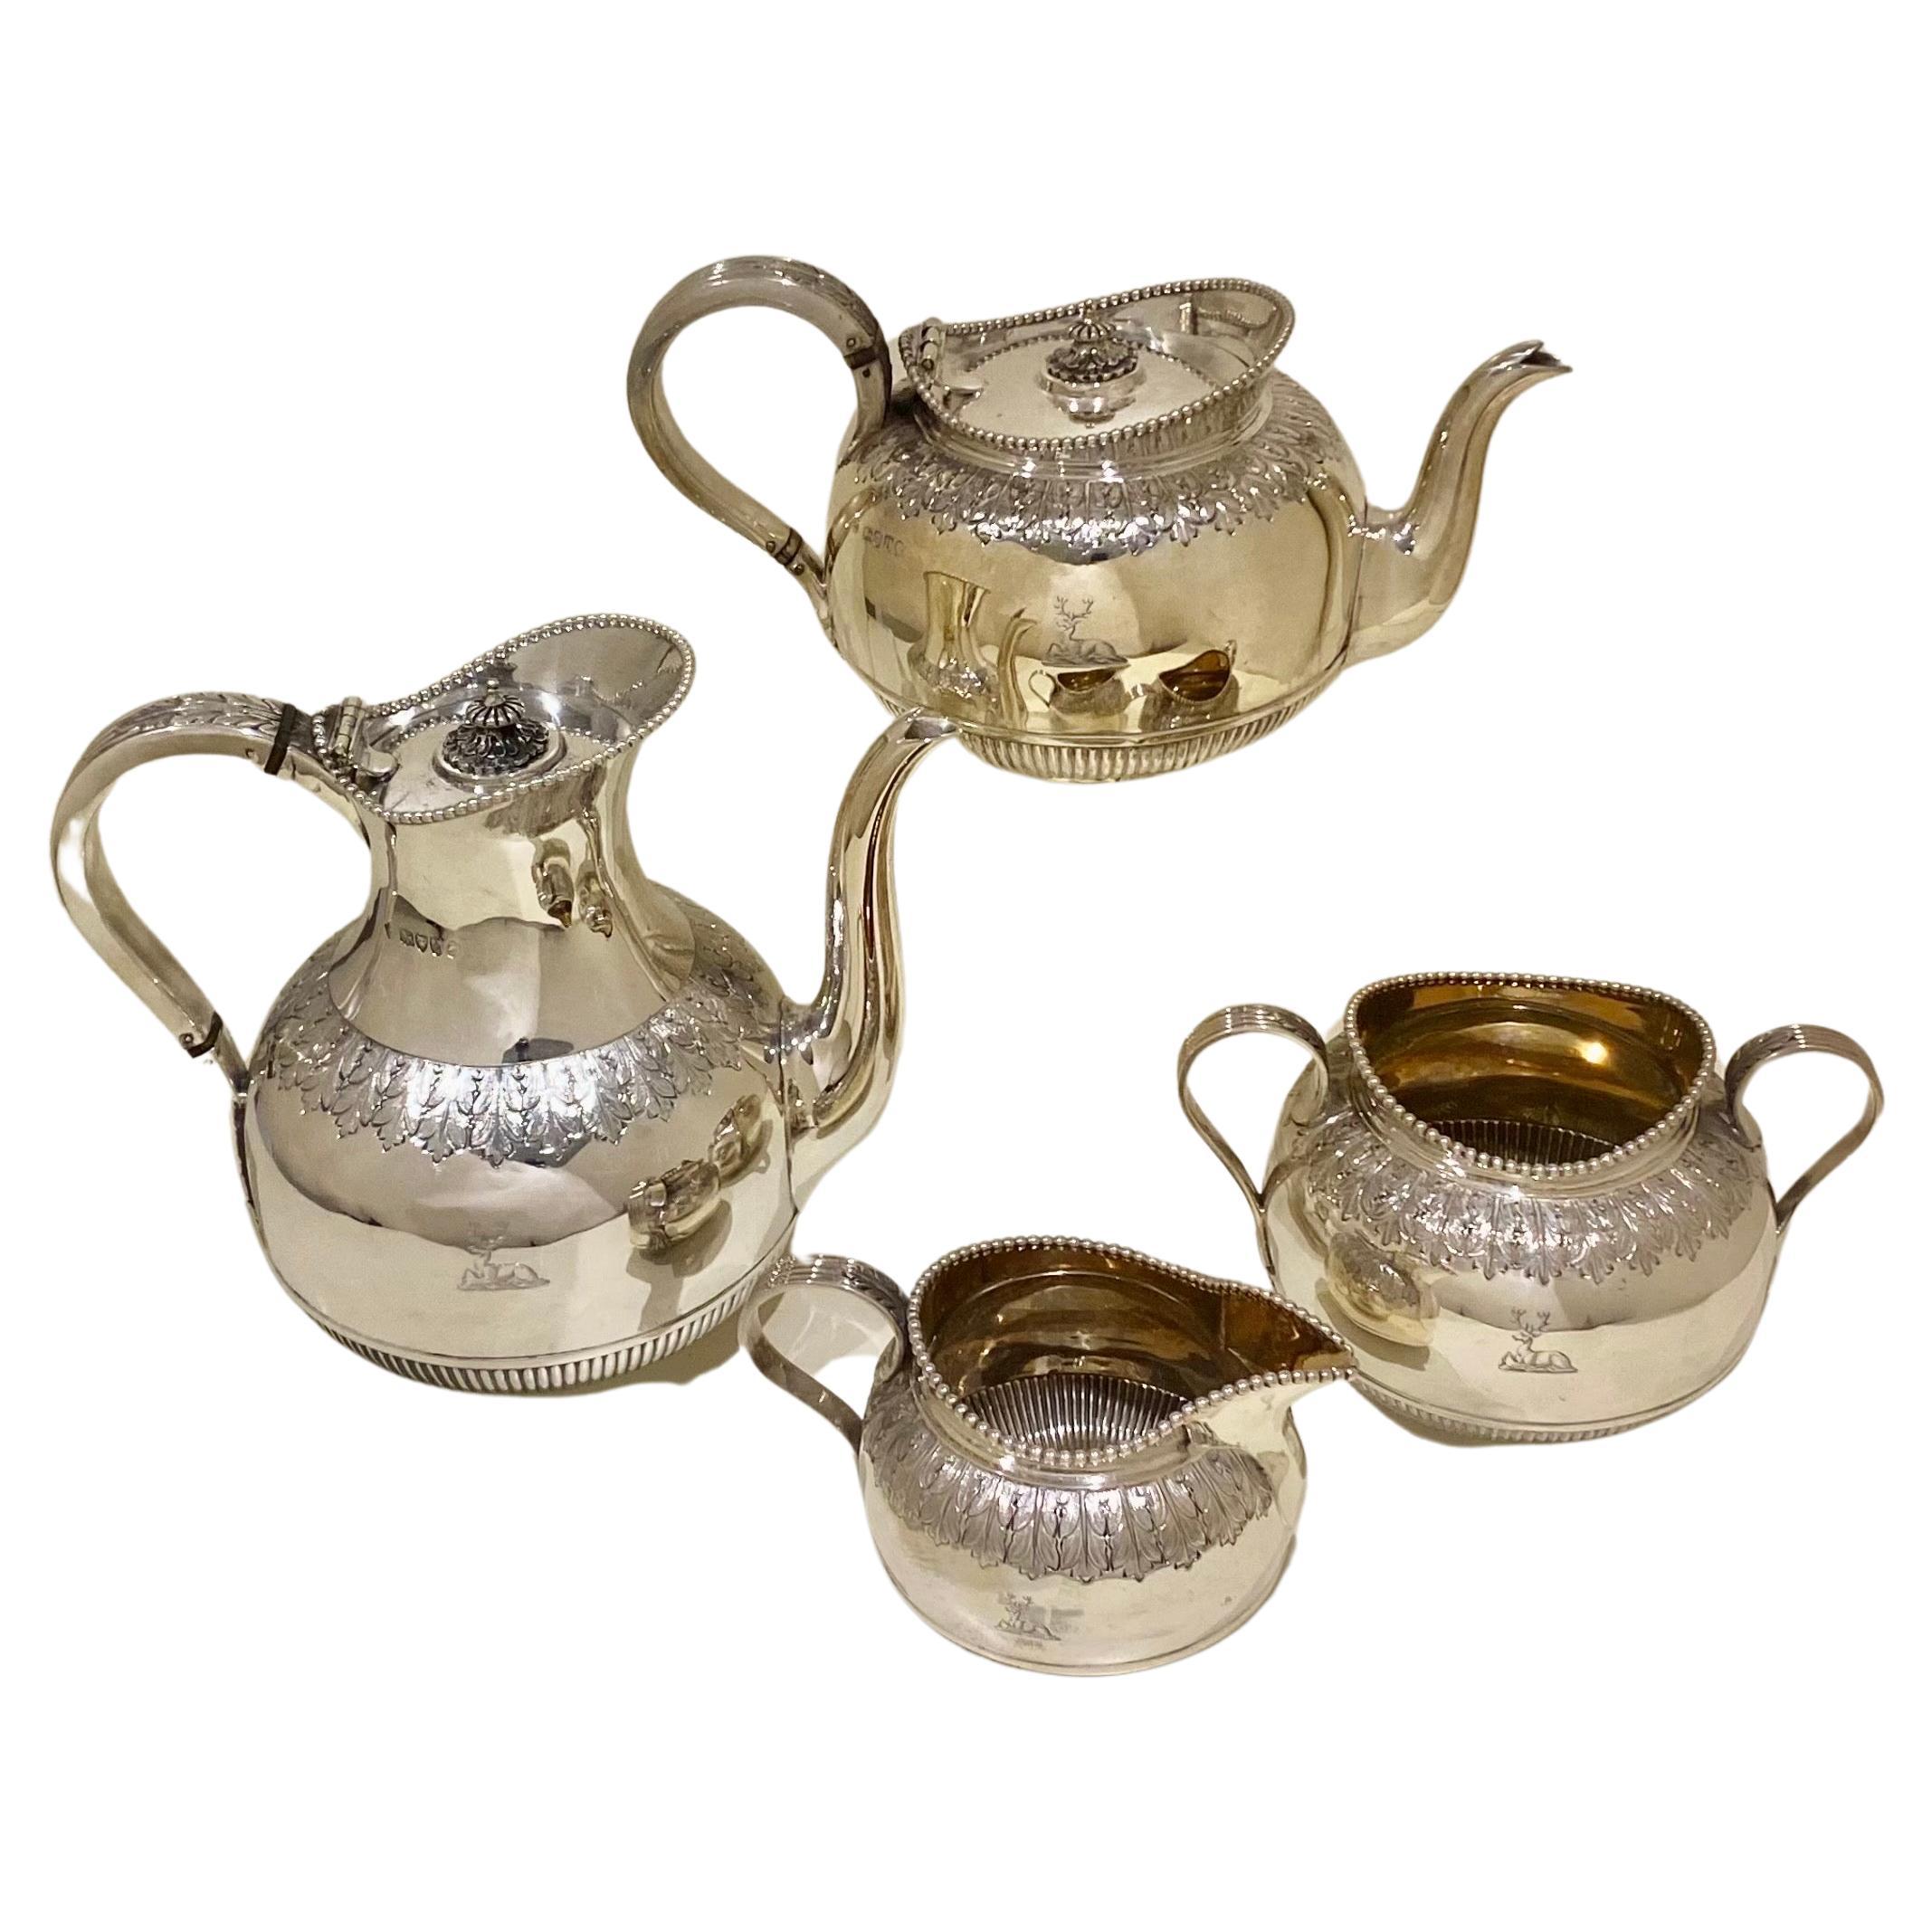 A Top quality antique Victorian hallmarked sterling silver four piece teaset comprising of a teapot, coffee pot, sugar bowl and jug particularly nice as it has been kept it in such superb condition and is immaculate throughout.
This superb quality